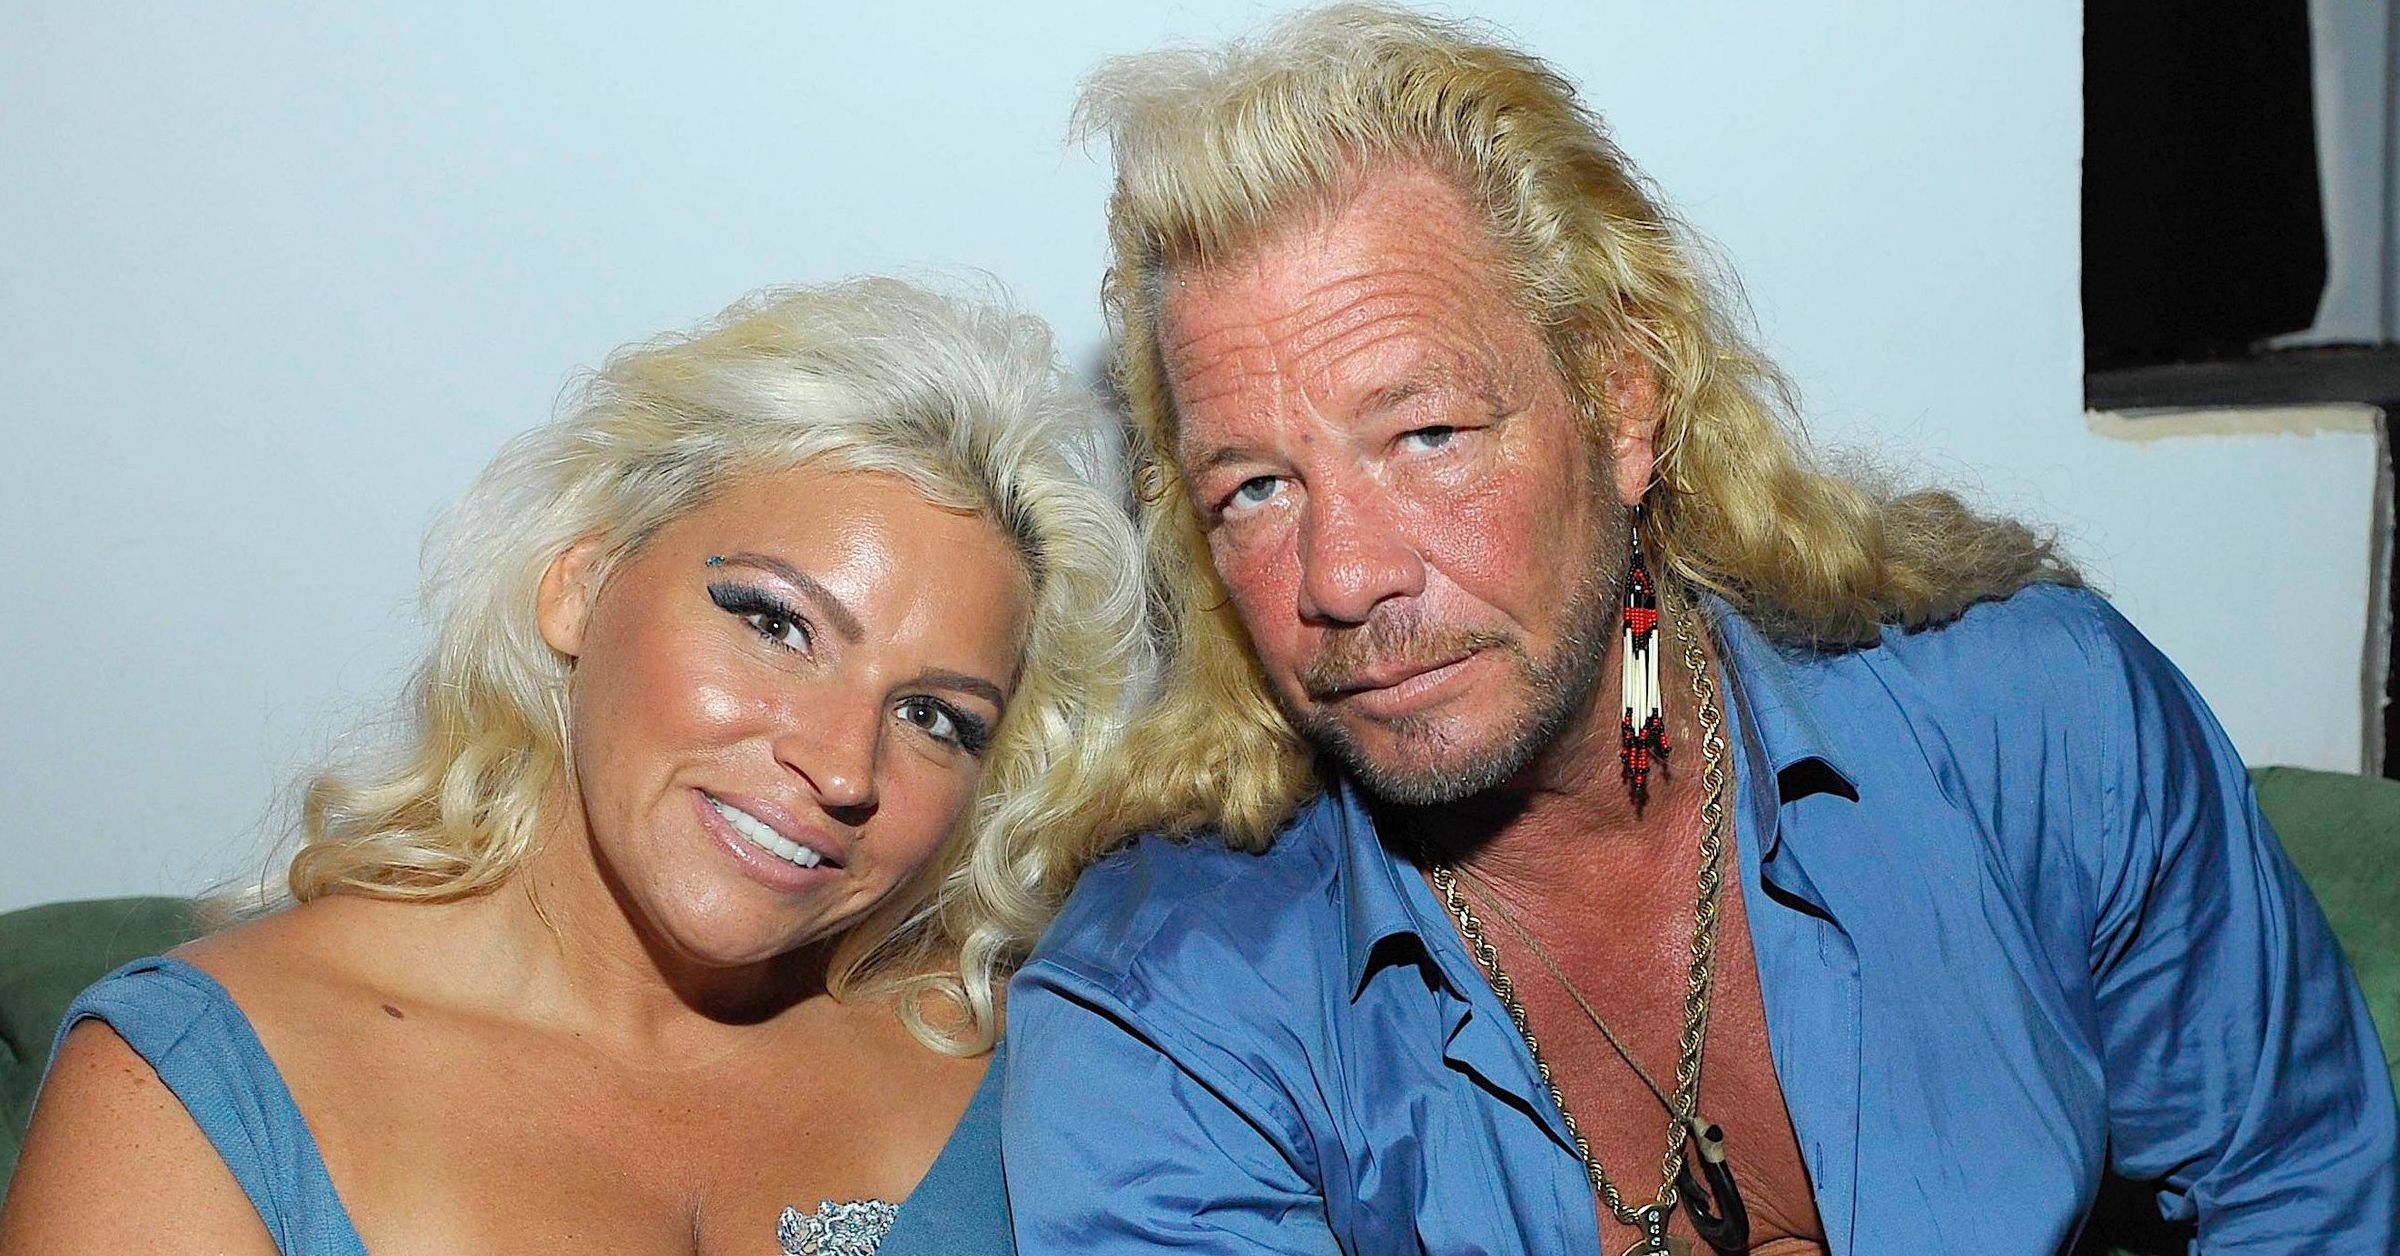 Moon Angell Sidesteps Questions About Duane 'Dog' Chapman's Shocking Marriage Proposal2400 x 1256